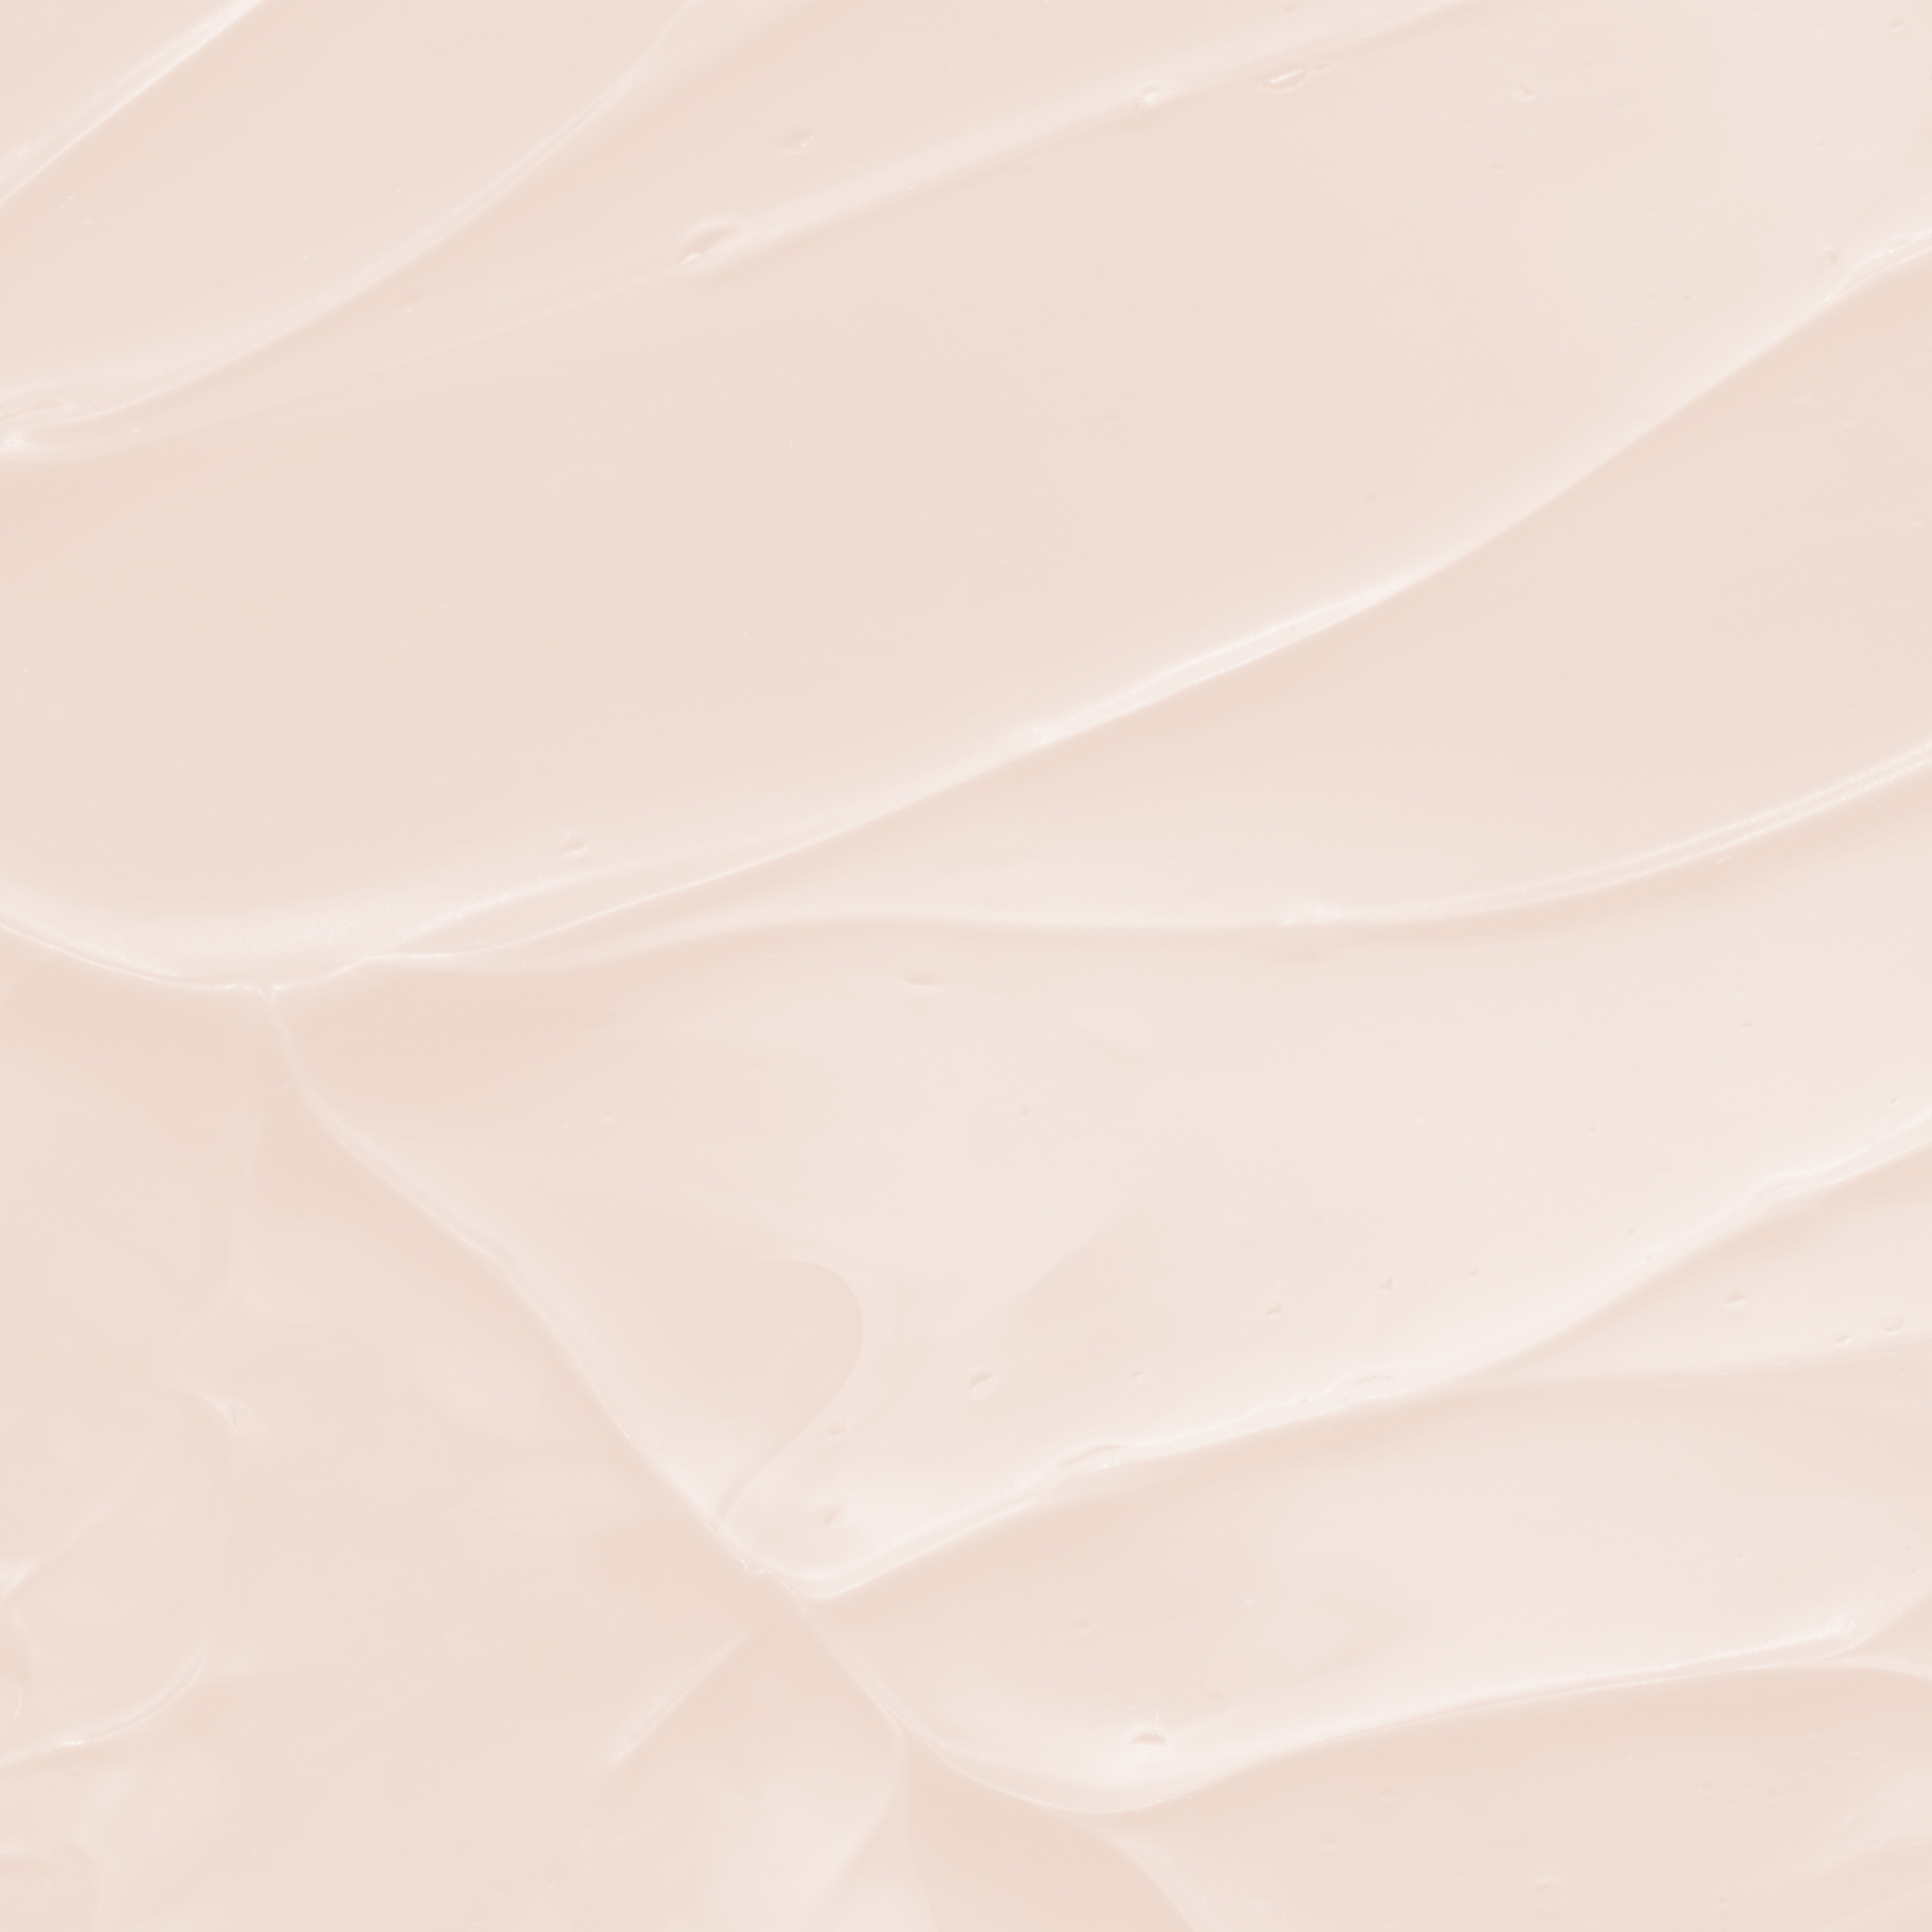 Pink Cosmetic Clay Paint Texture Background